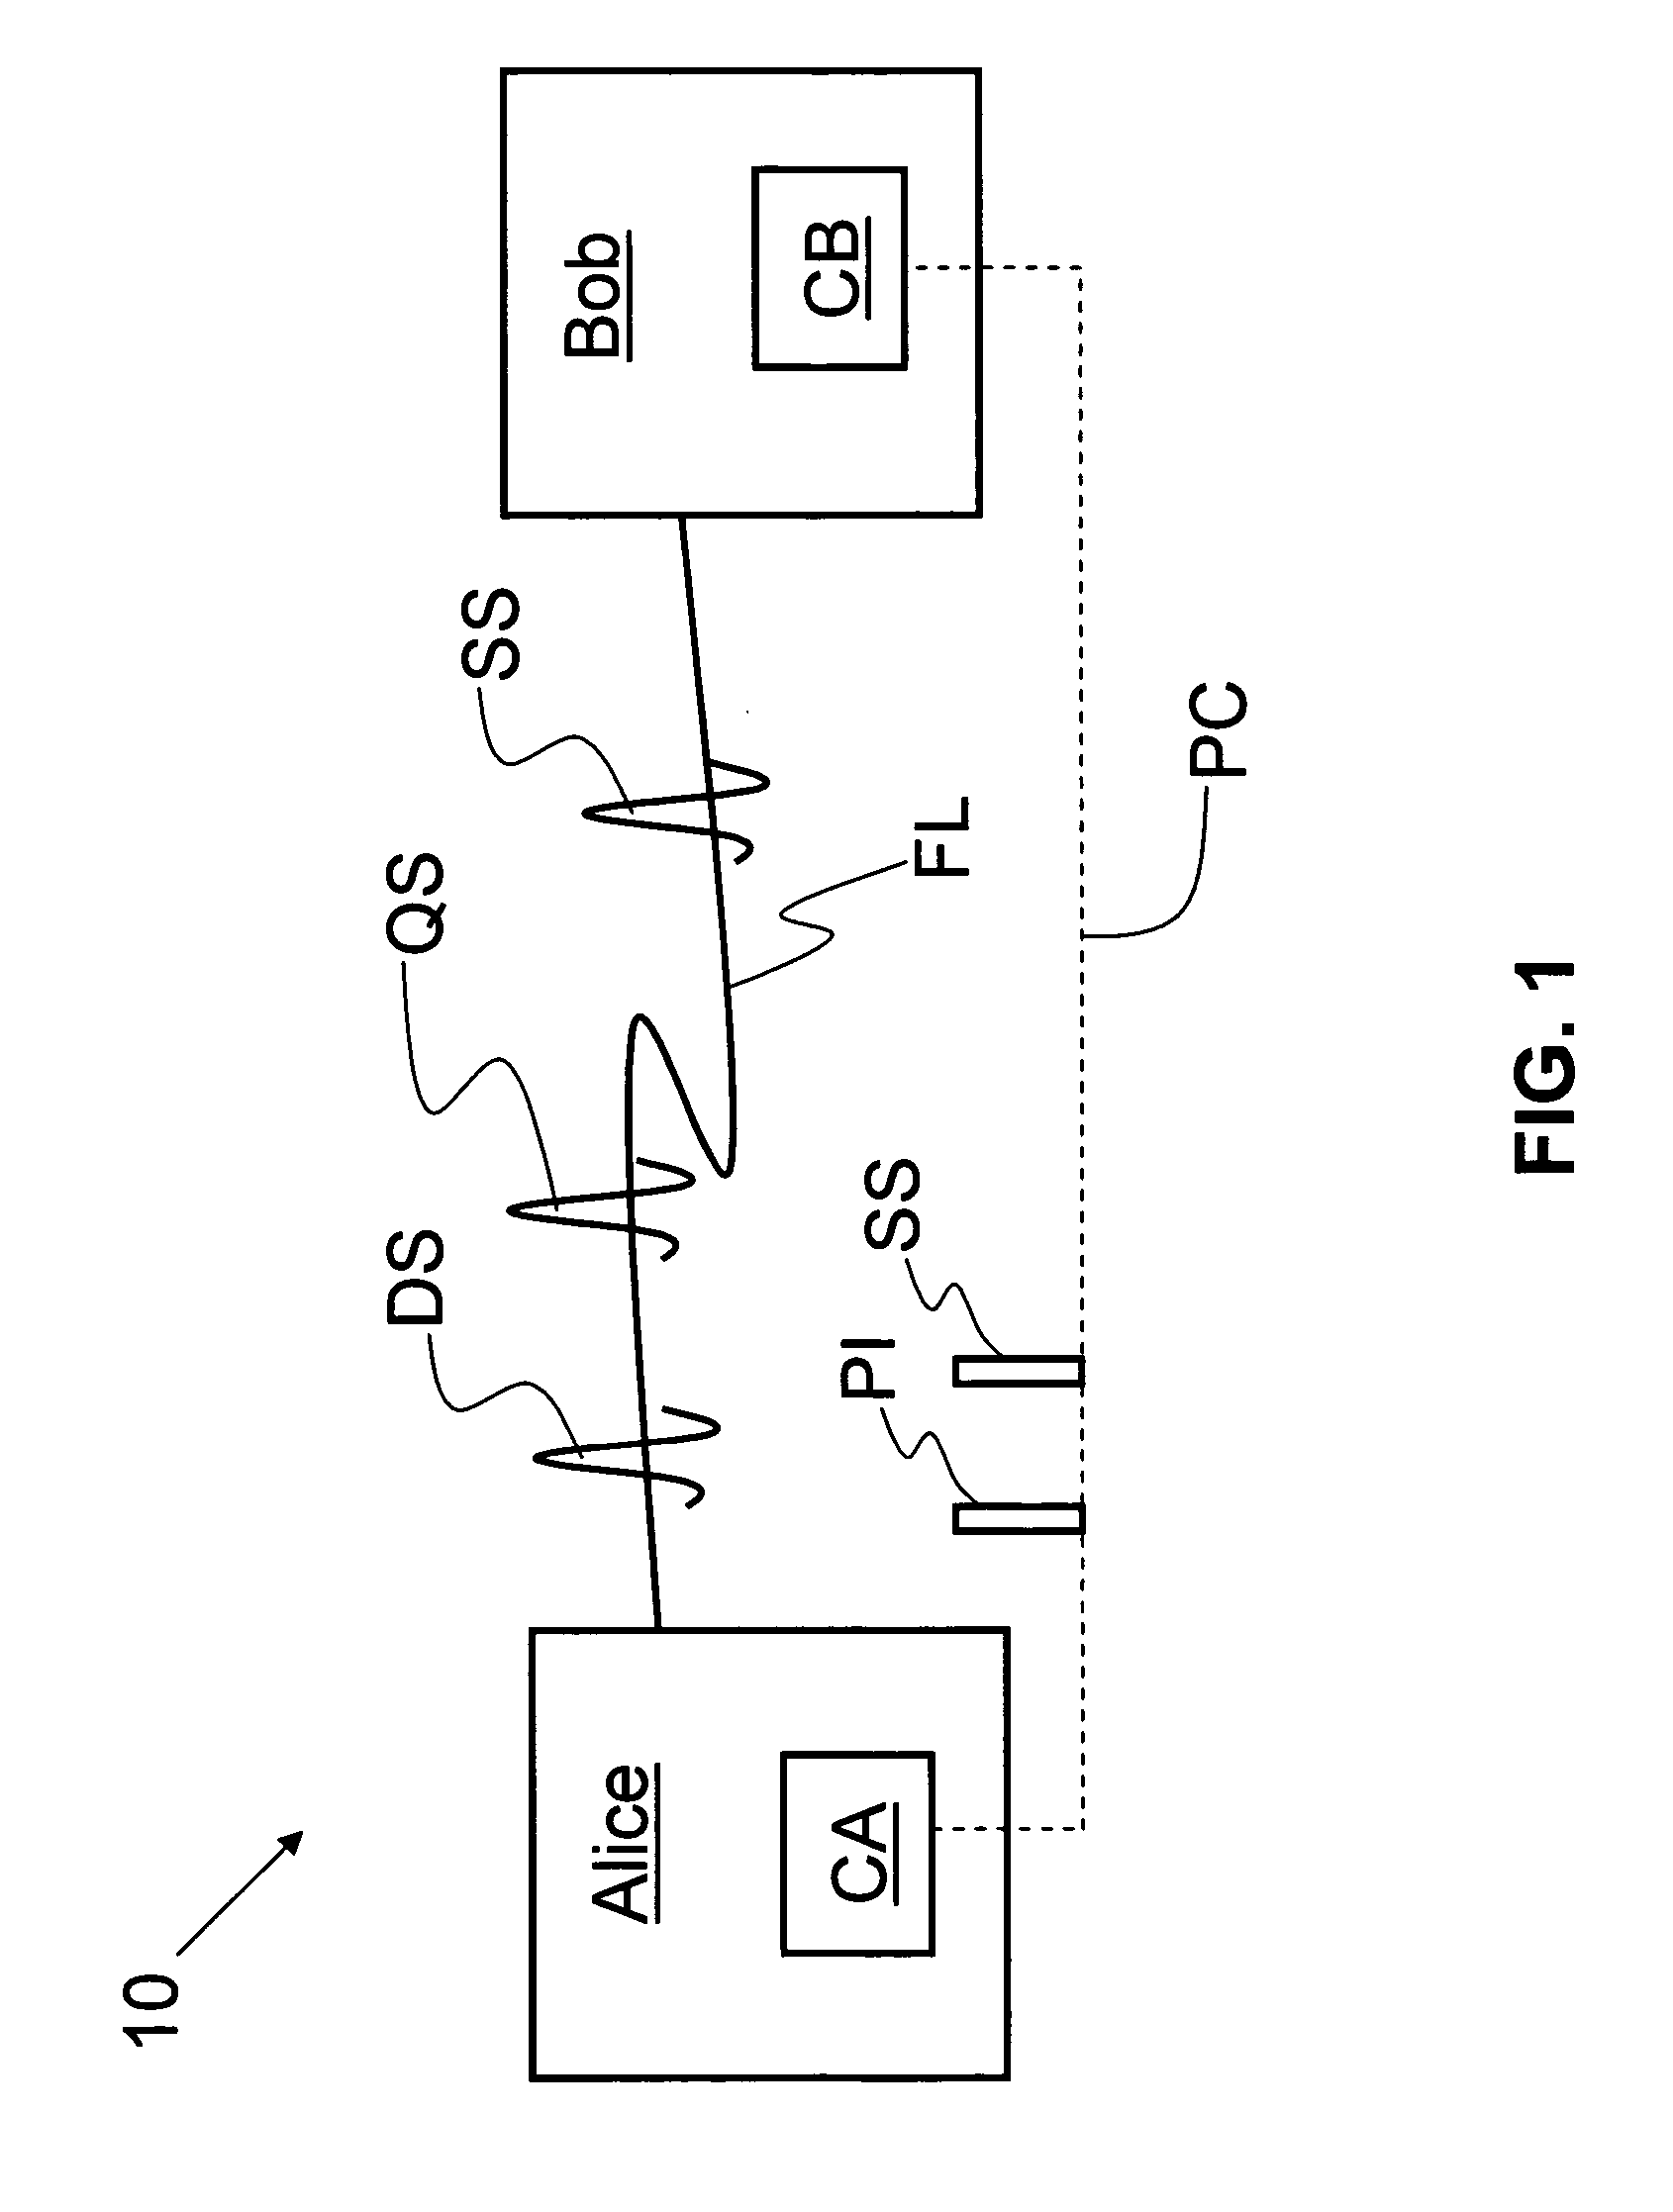 QKD station with efficient decoy state capability